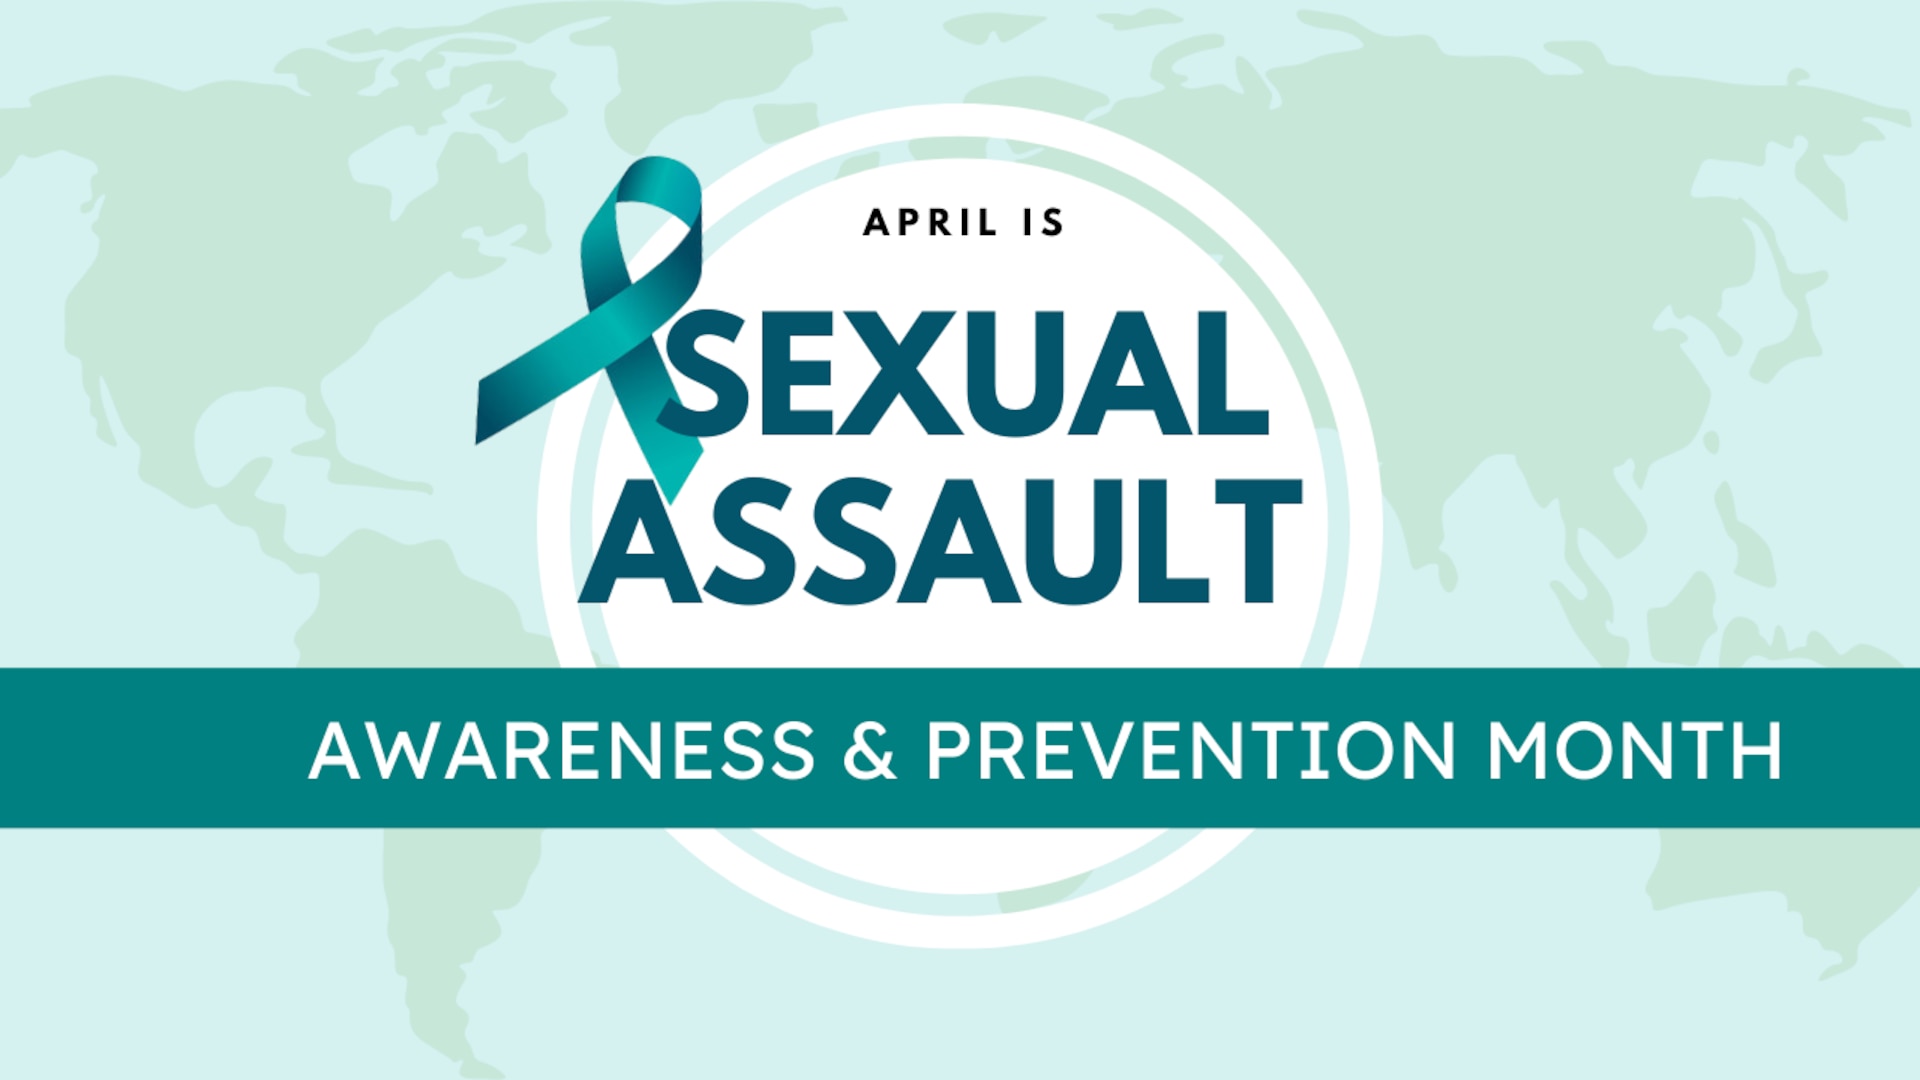 Do Your Part April Is Sexual Assault Awareness And Prevention Month Defense Logistics Agency 1019